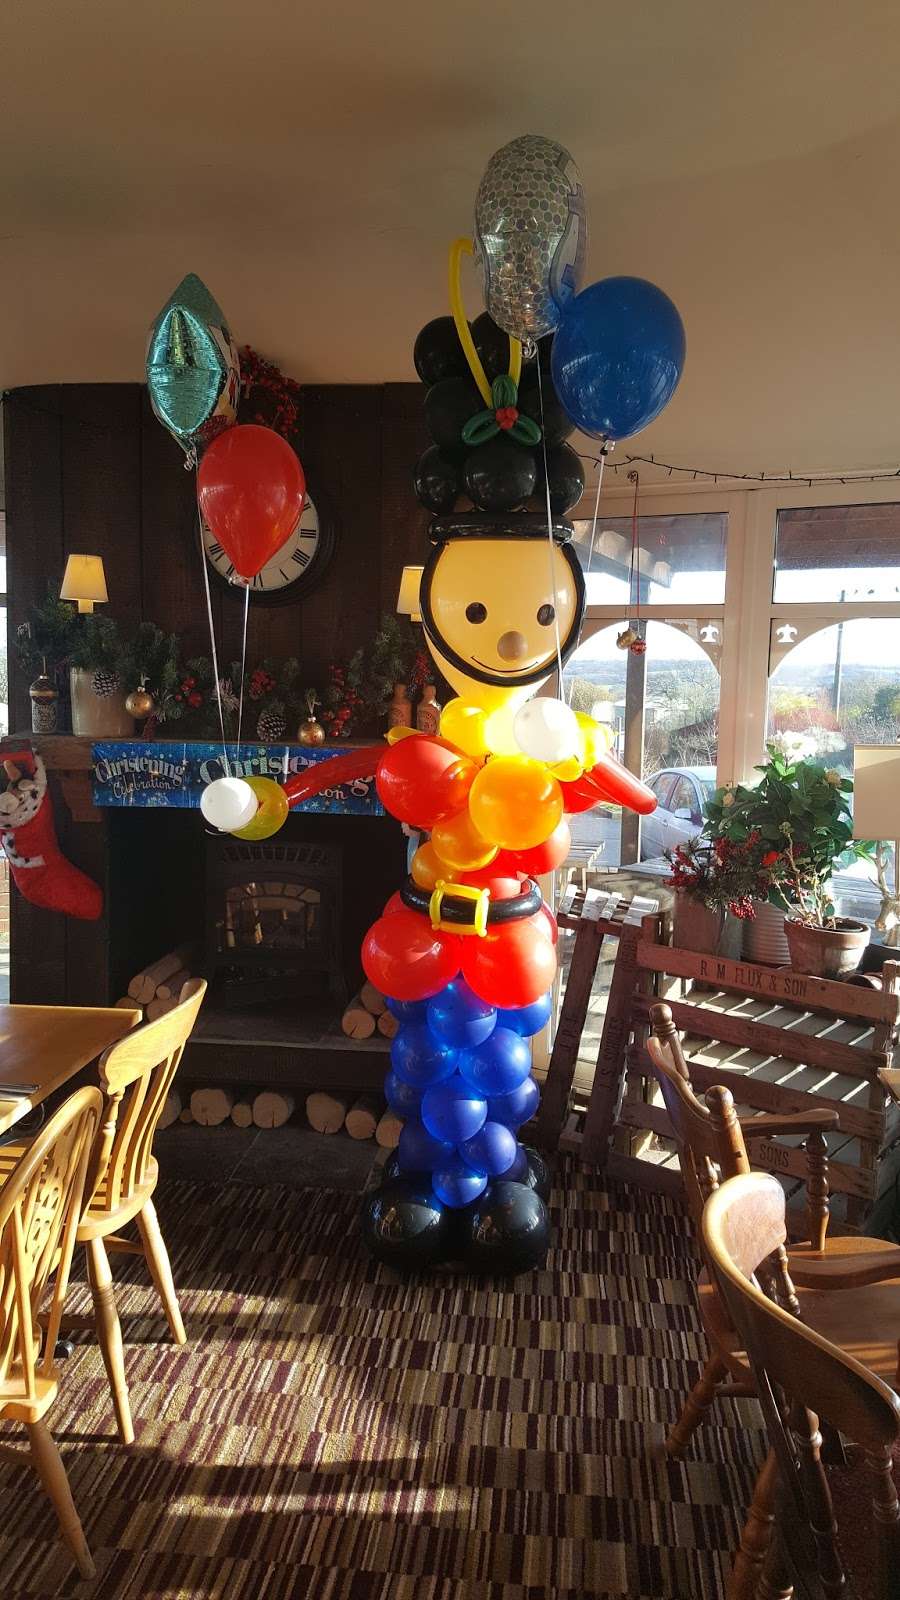 The Balloon Creation Station | The Lindens, St.Albans Rd W, Hatfield AL10 0RT, UK | Phone: 07714 590325